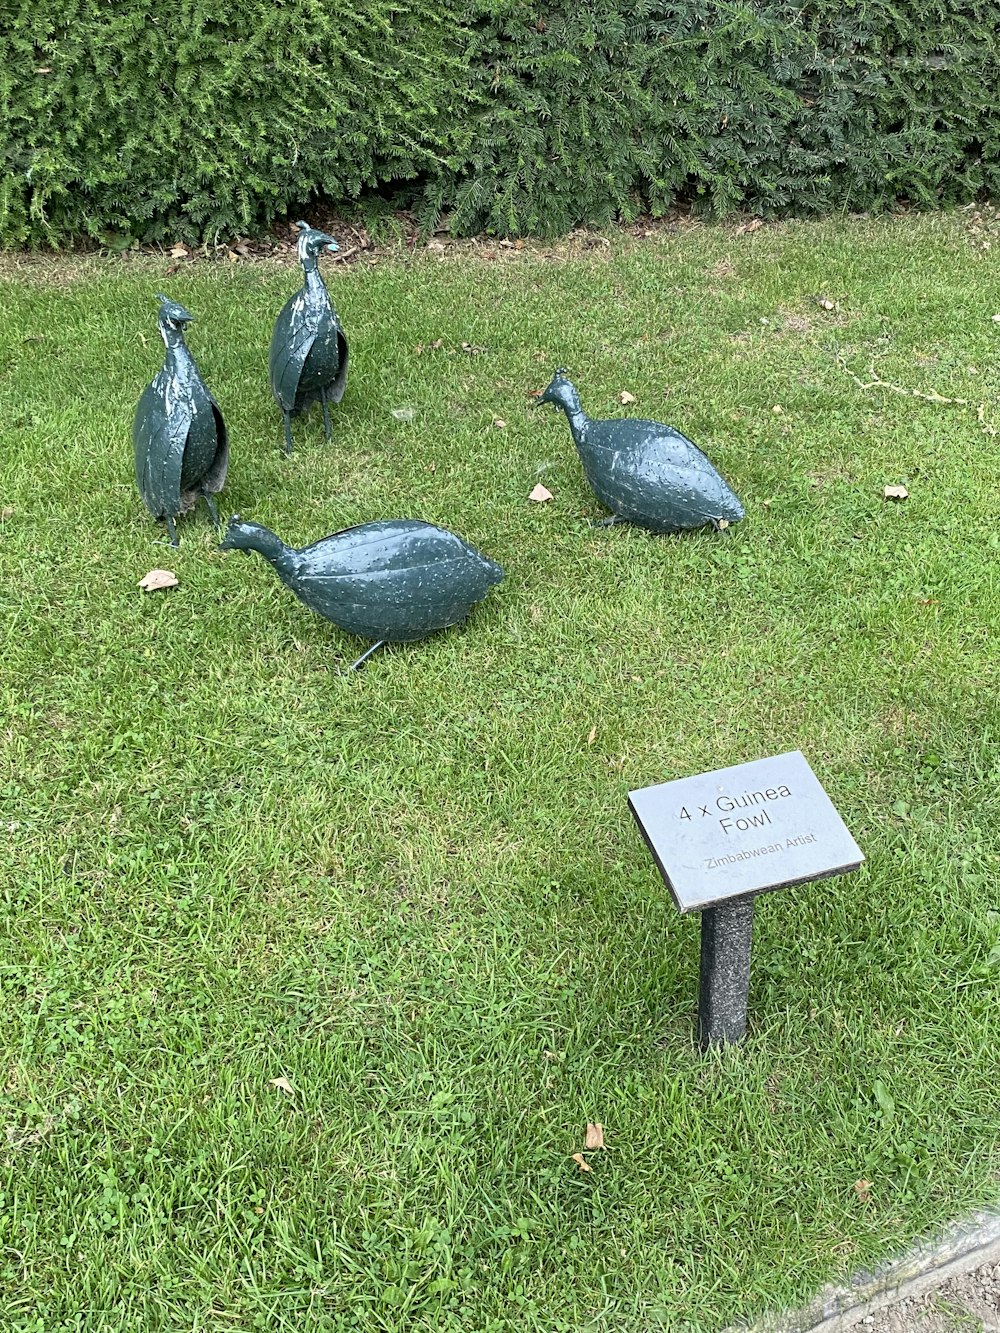 a group of peacocks on grass